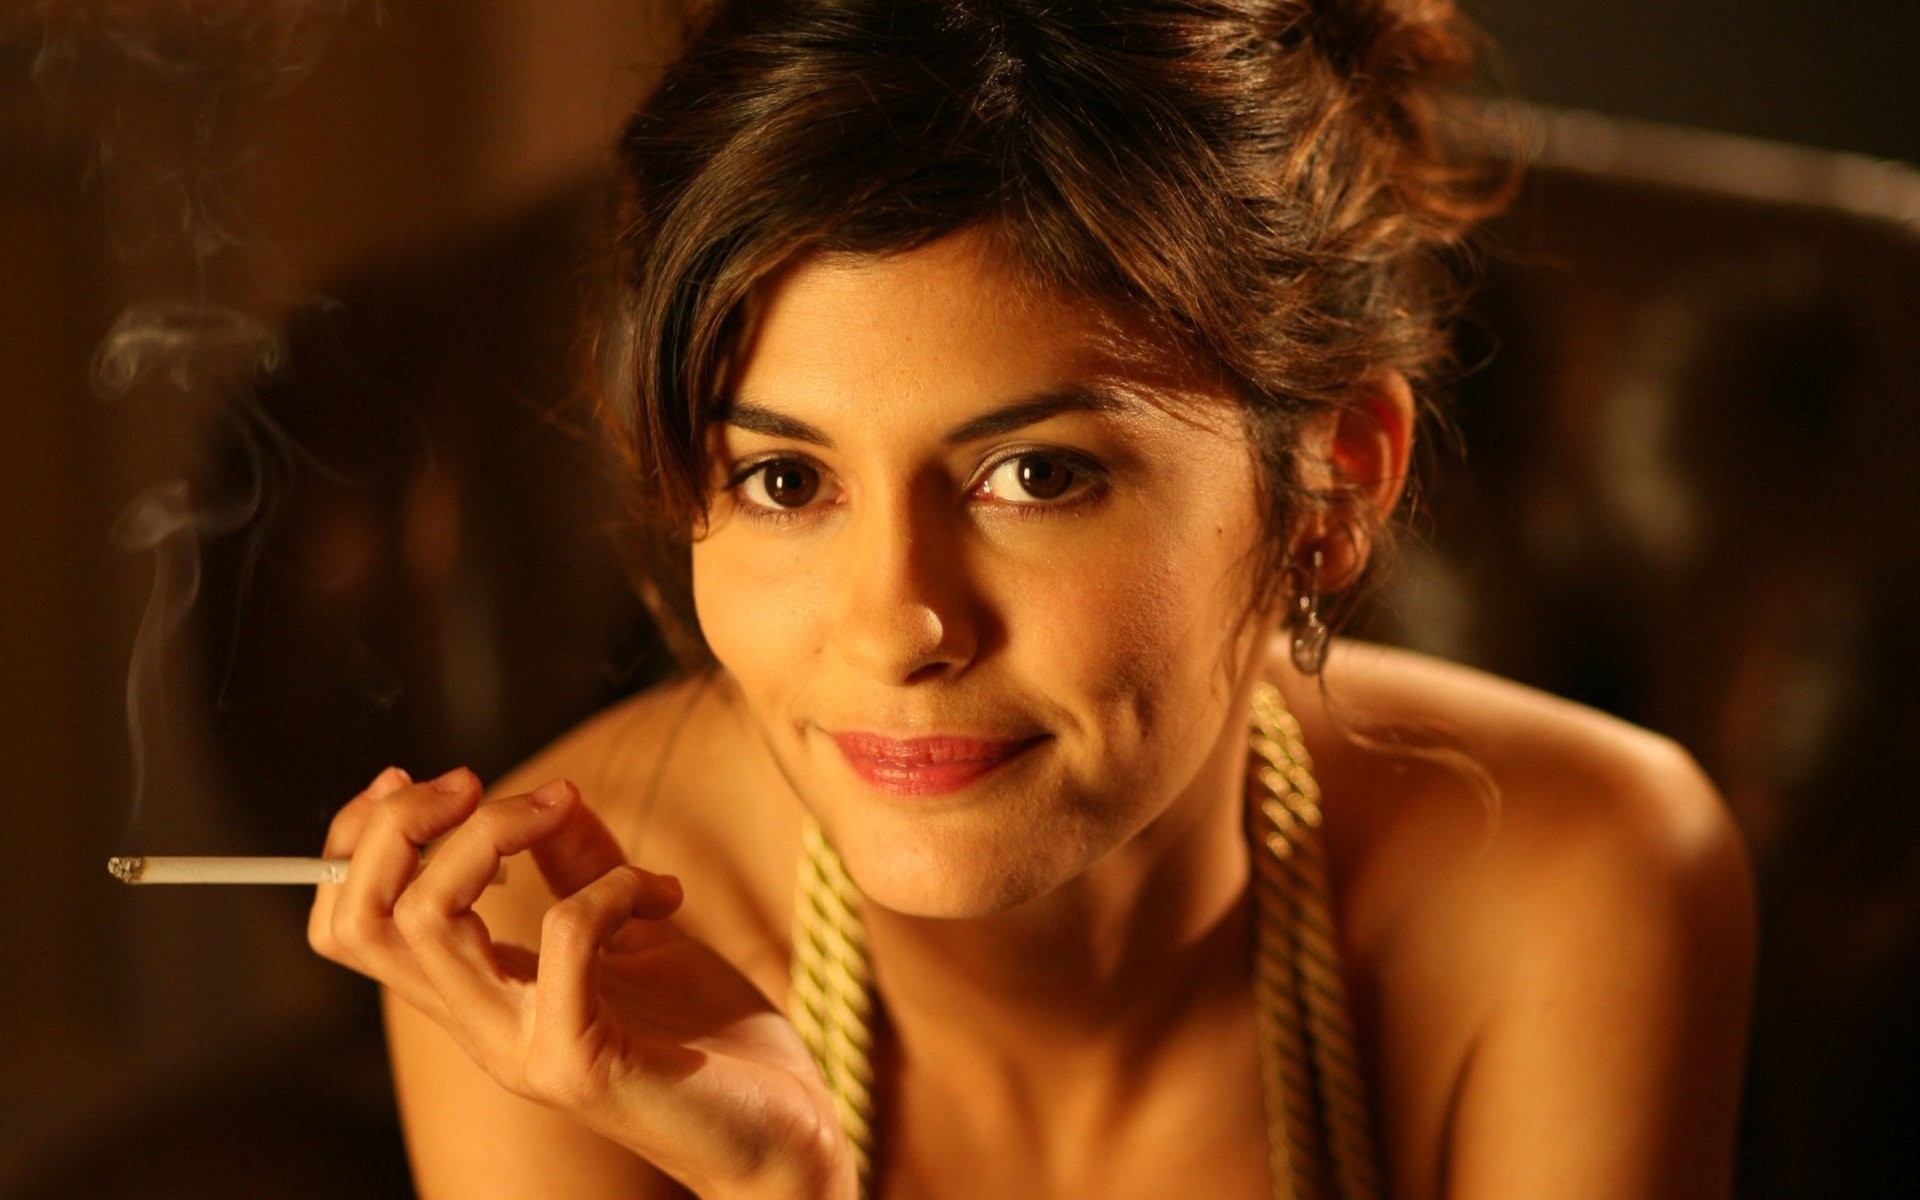 Audrey Tautou: "Priceless", French Comedy Film, Starring Audrey Tautou And Gad Elmaleh, 2006. 1920x1200 HD Wallpaper.